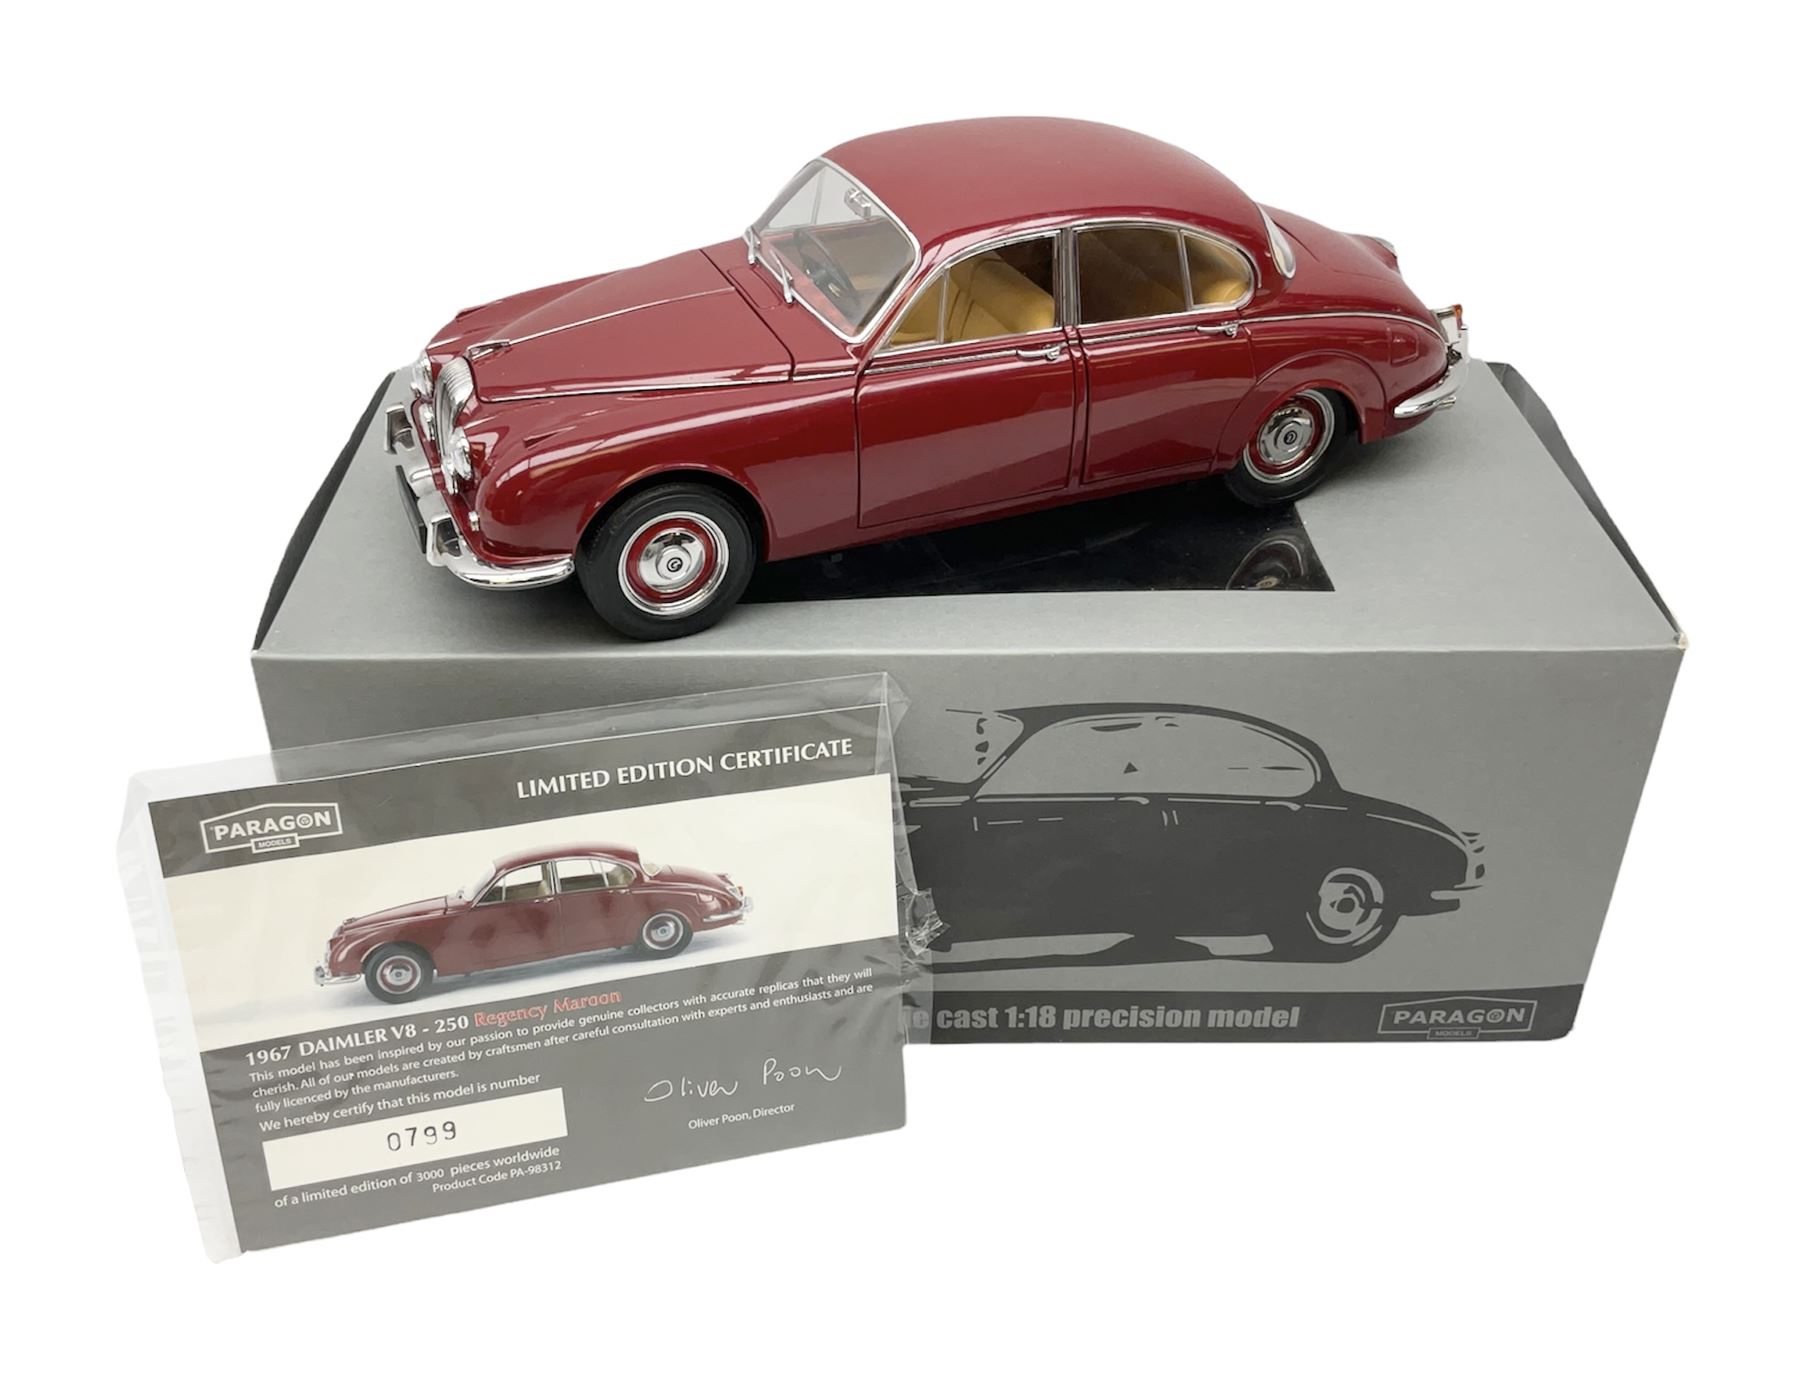 Paragon limited edition 1:18 scale die-cast model of a 1967 Daimler V8-250